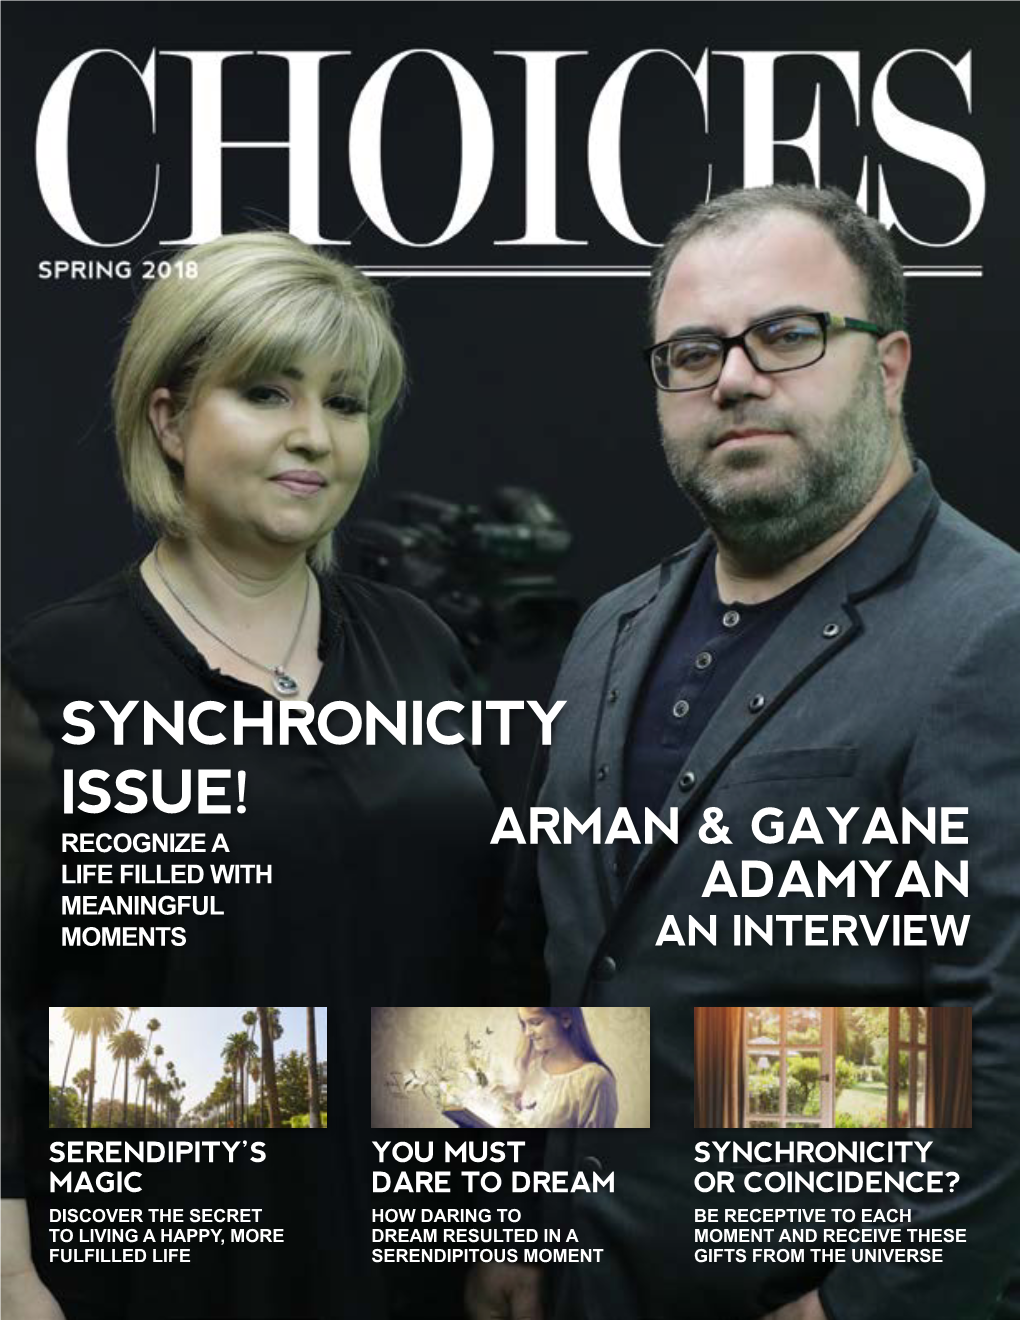 Synchronicity Issue! Recognize a Arman & Gayane Life Filled with Adamyan Meaningful Moments an Interview